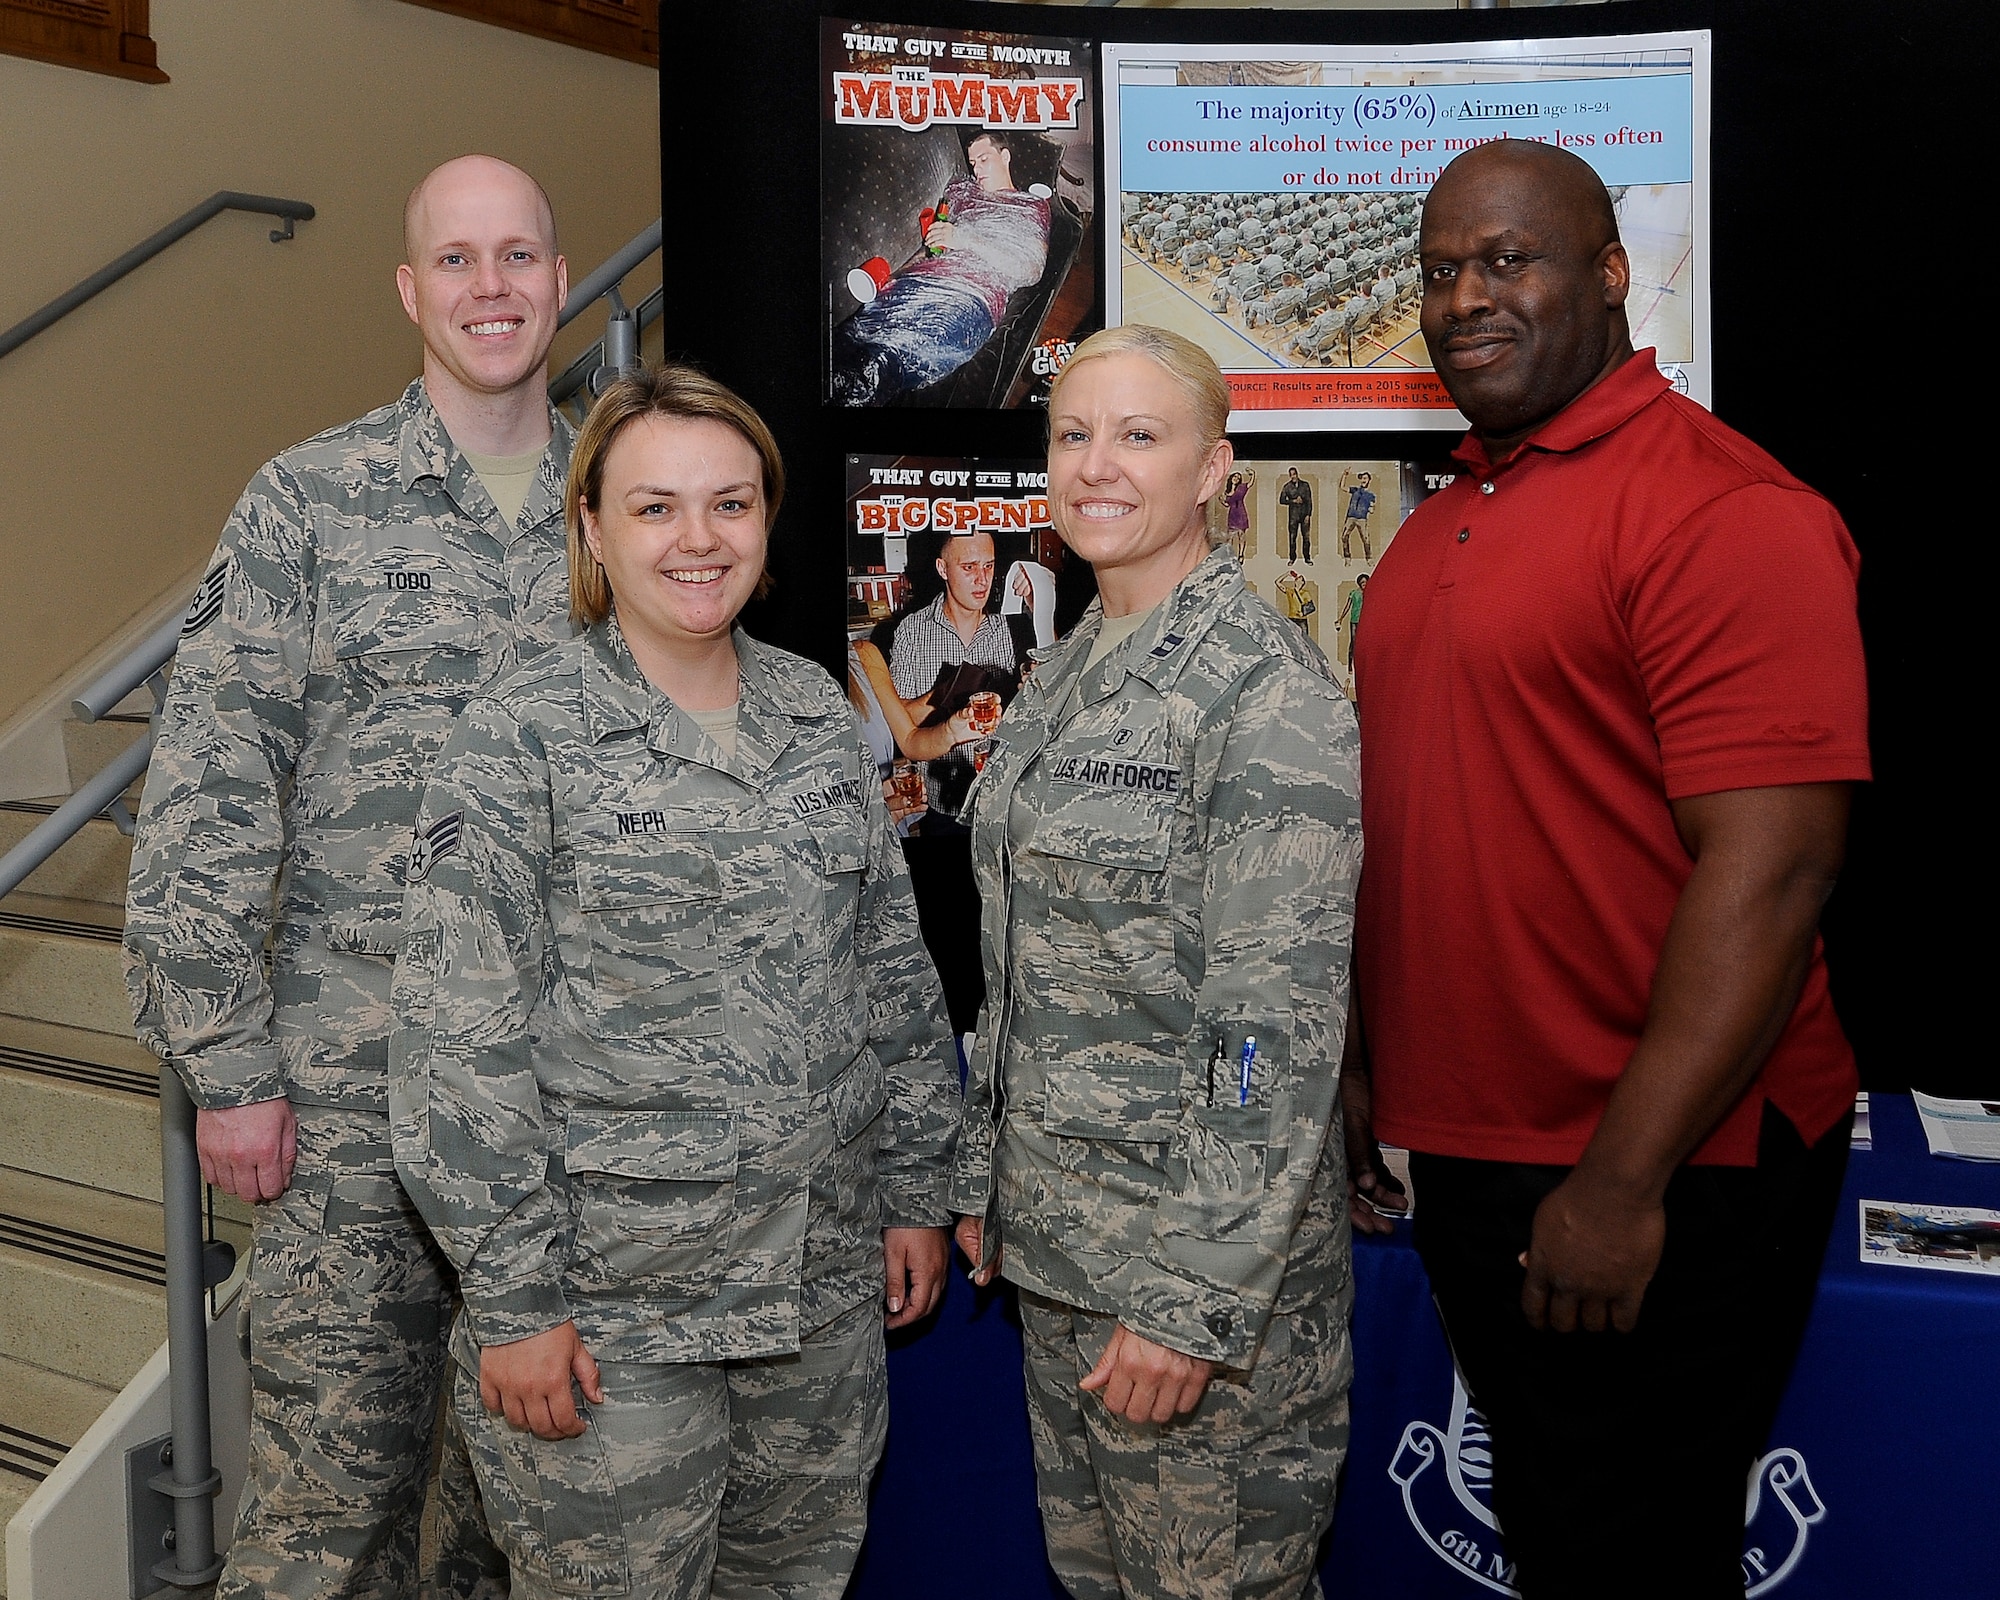 Alcohol and Drug Abuse Prevention and Treatment (ADAPT) members stand in front of an ADAPT display in the medical clinic at MacDill Air Force Base Fla., May 18, 2016. The ADAPT program provides prevention and treatment services for alcohol and substance abuse. (U.S. Air Force photo by Airman 1st Class Mariette Adams)